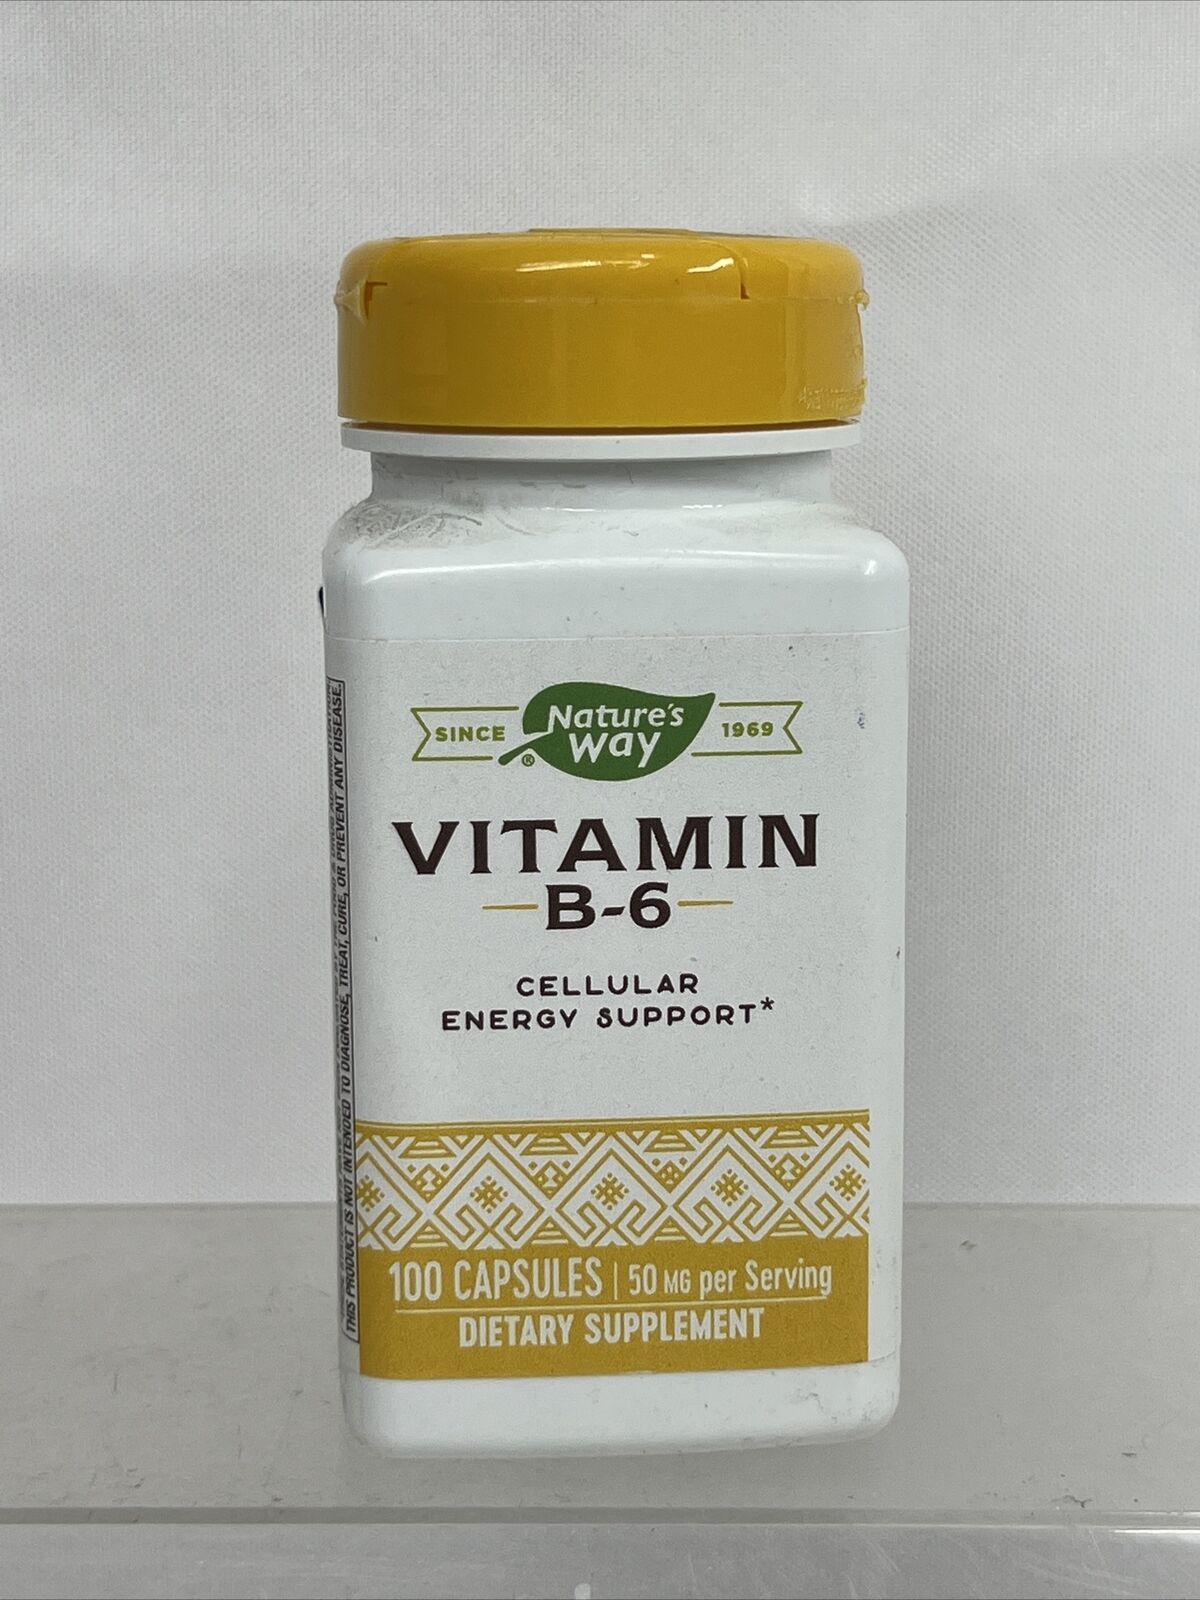 Nature's Way Vitamin B-6 Energy Support 50 MG  100 Capsules 7/24 COMBINE SHIP!! - $6.64